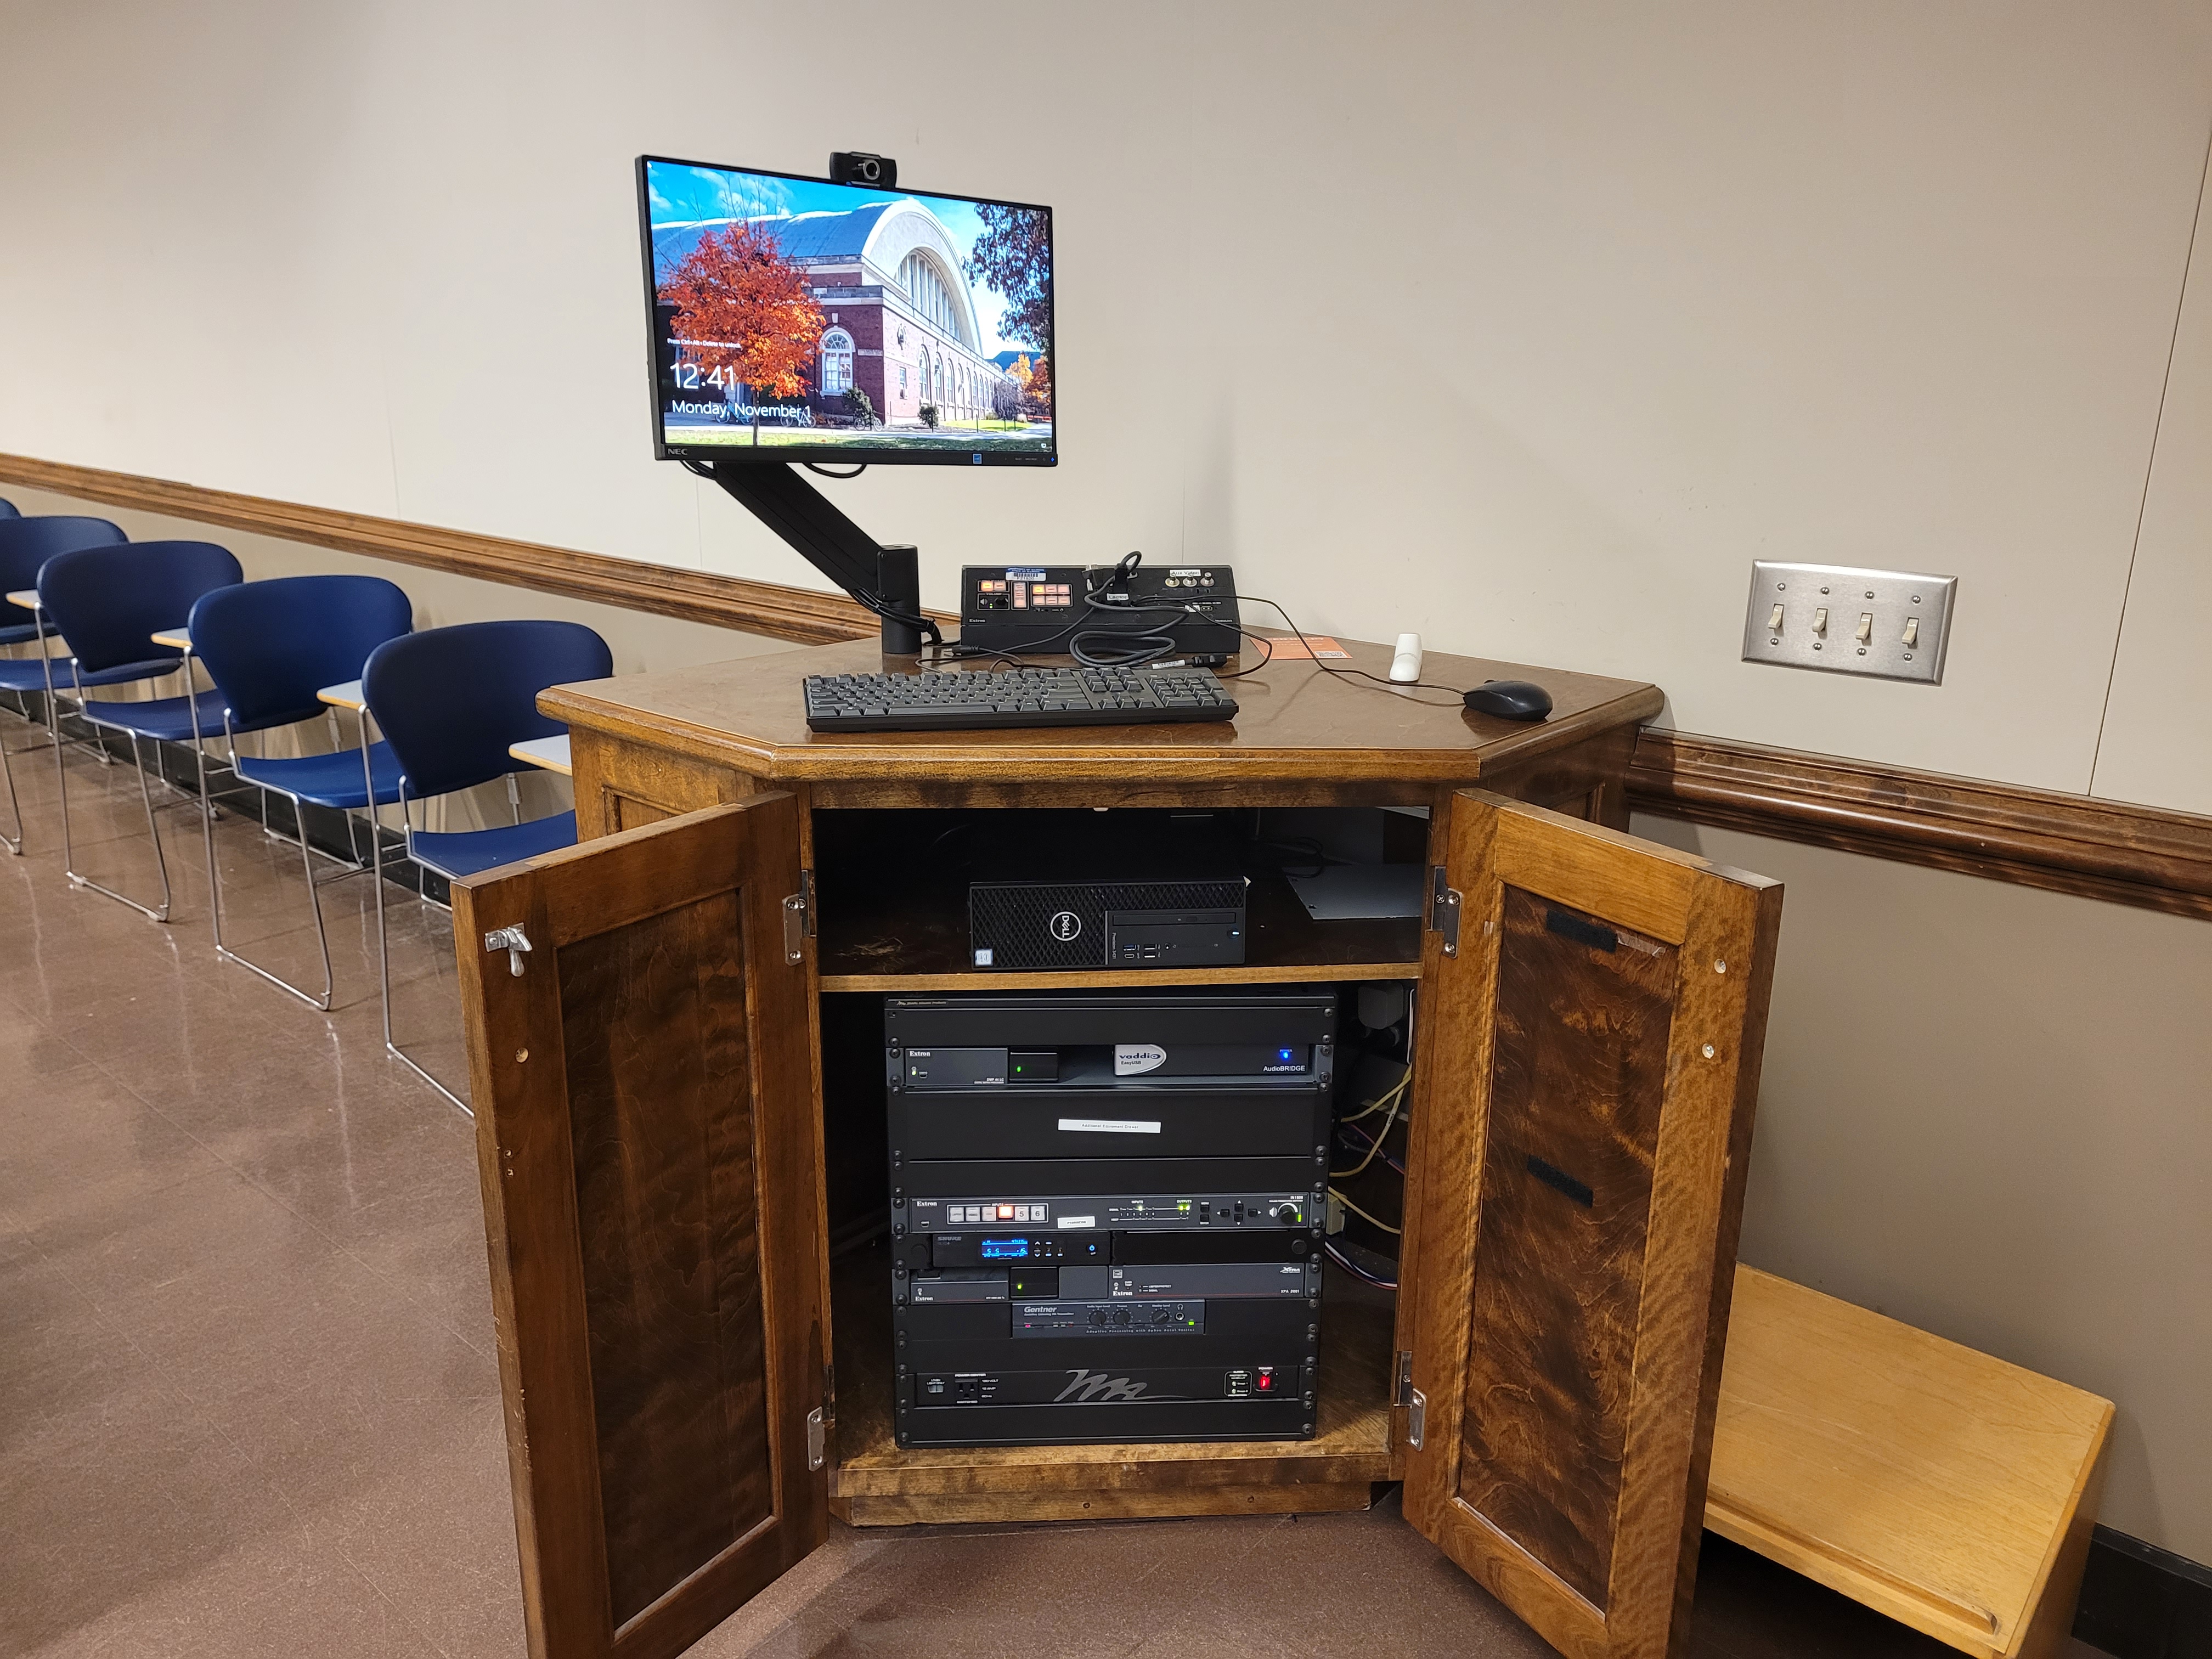 A view of the open cabinet PC, HDMI and Wireless inputs, a push button controller, and audio visual rack.